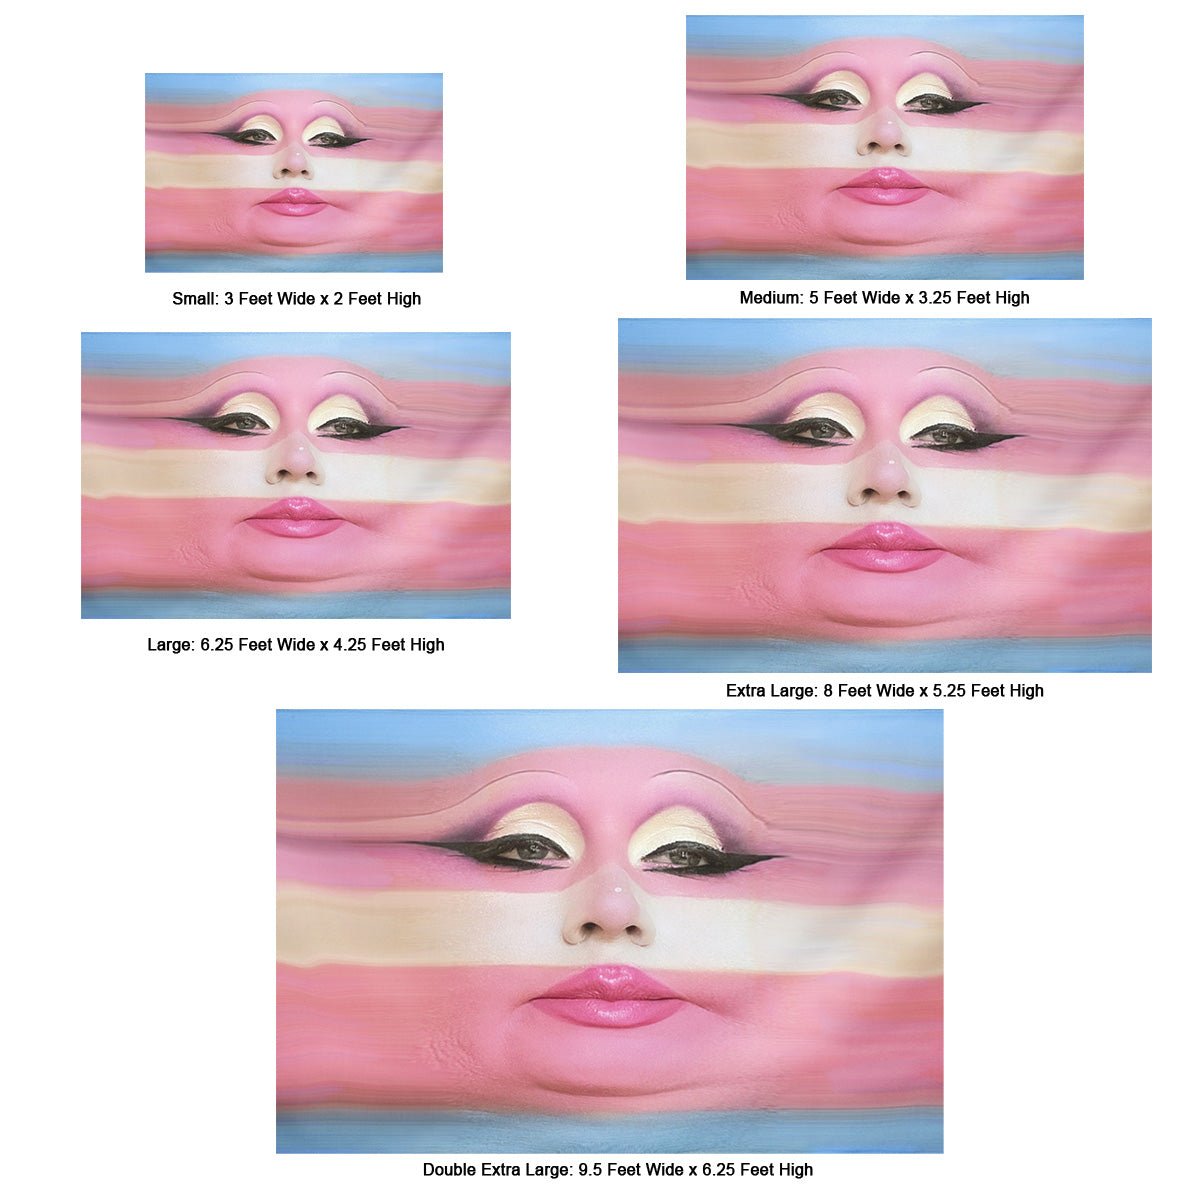 Juno Birch - Trans Pride Mood All-Over Print Flag - dragqueenmerch